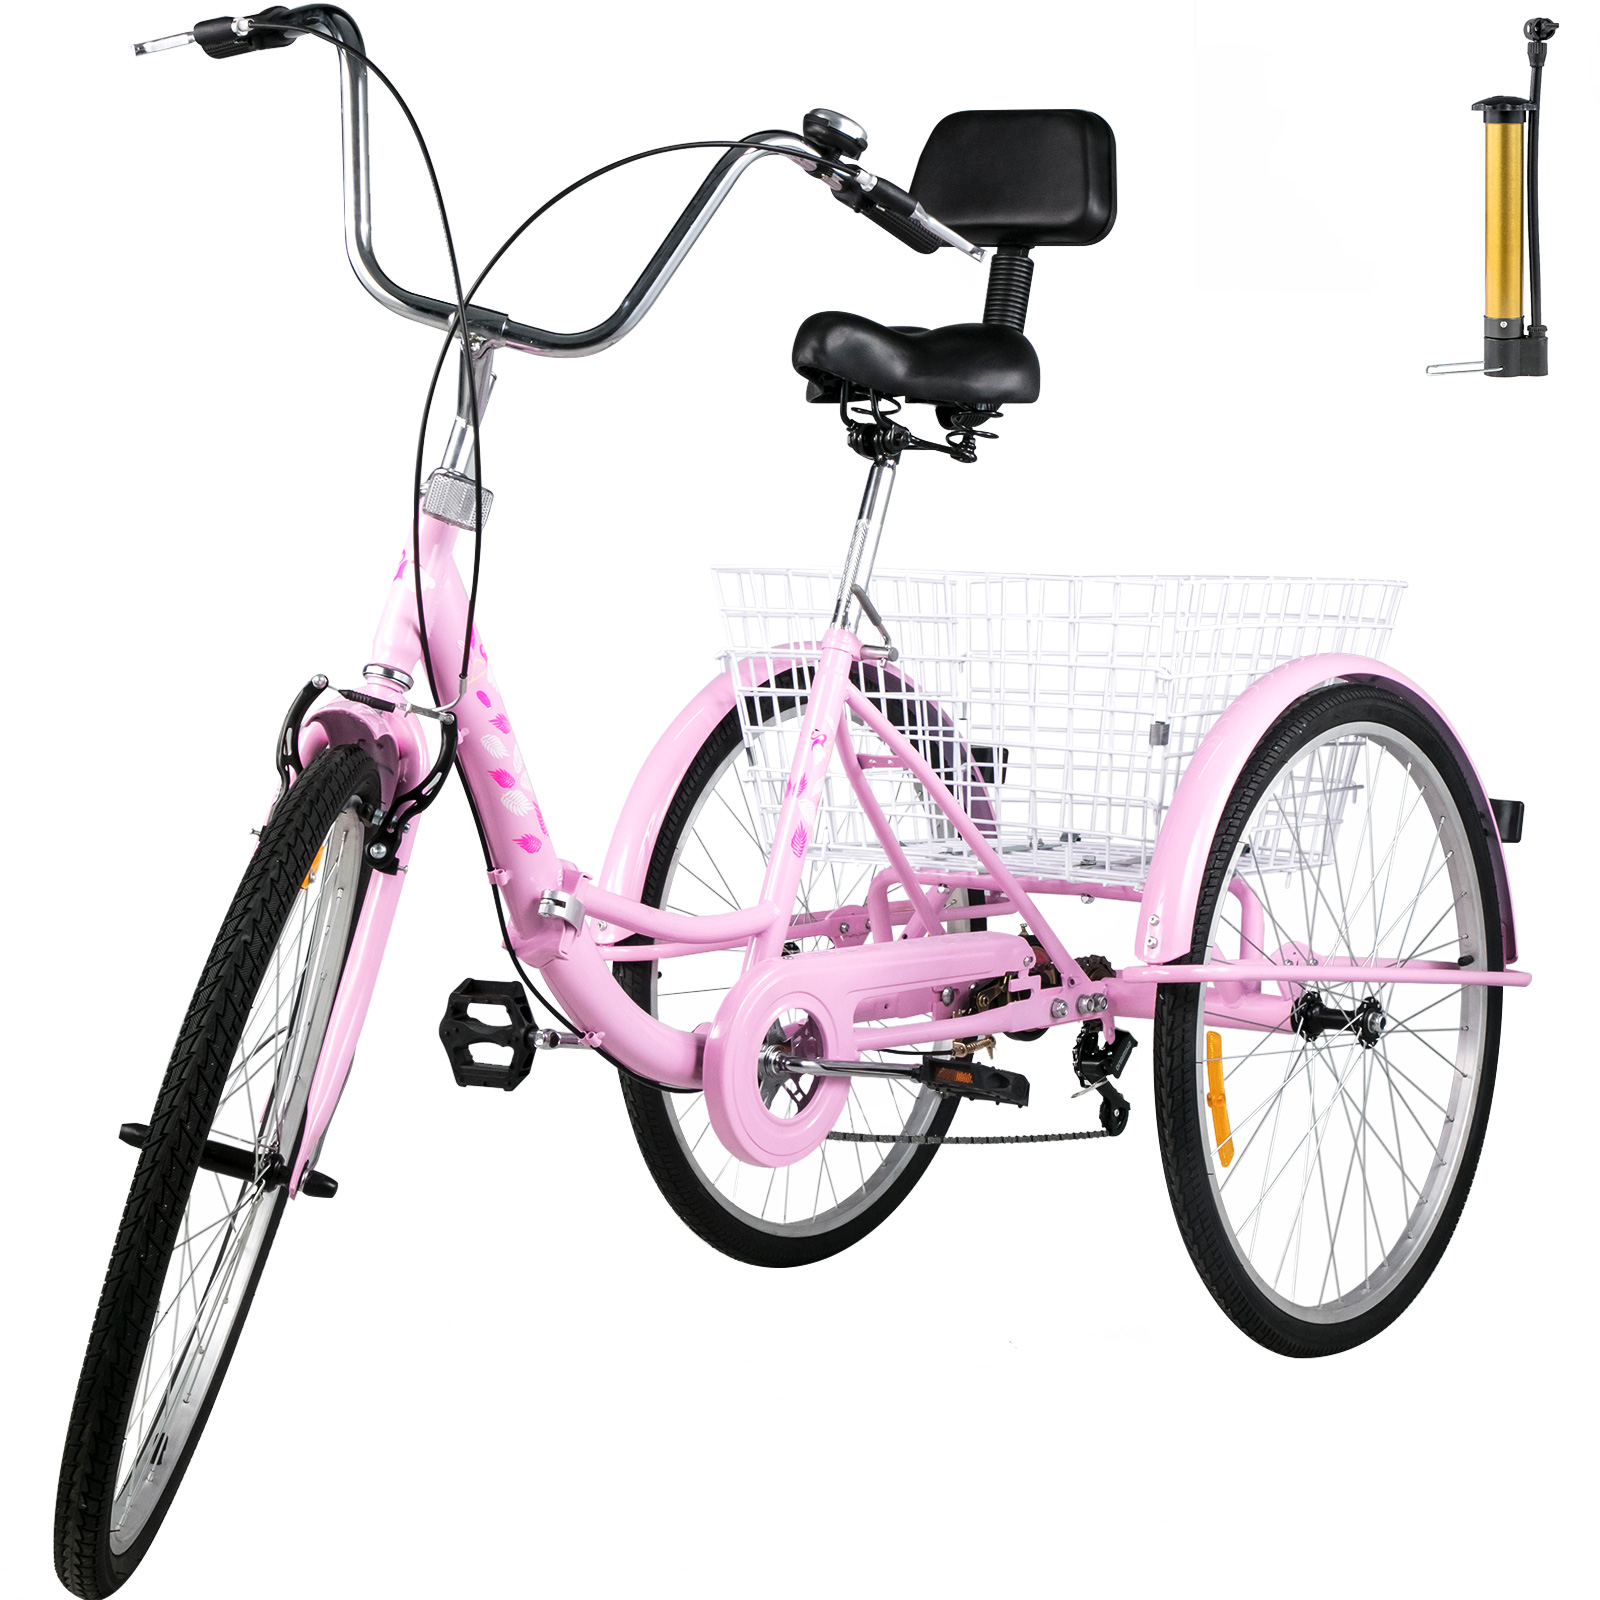 VEVOR Foldable Adult Tricycle 24 Wheels,7-Speed Trike, 3 Wheels Colorful Bike with Basket, Portable and Foldable Bicycle for Adults Exercise Shopping Picnic Outdoor Activities,Pink - image 1 of 9